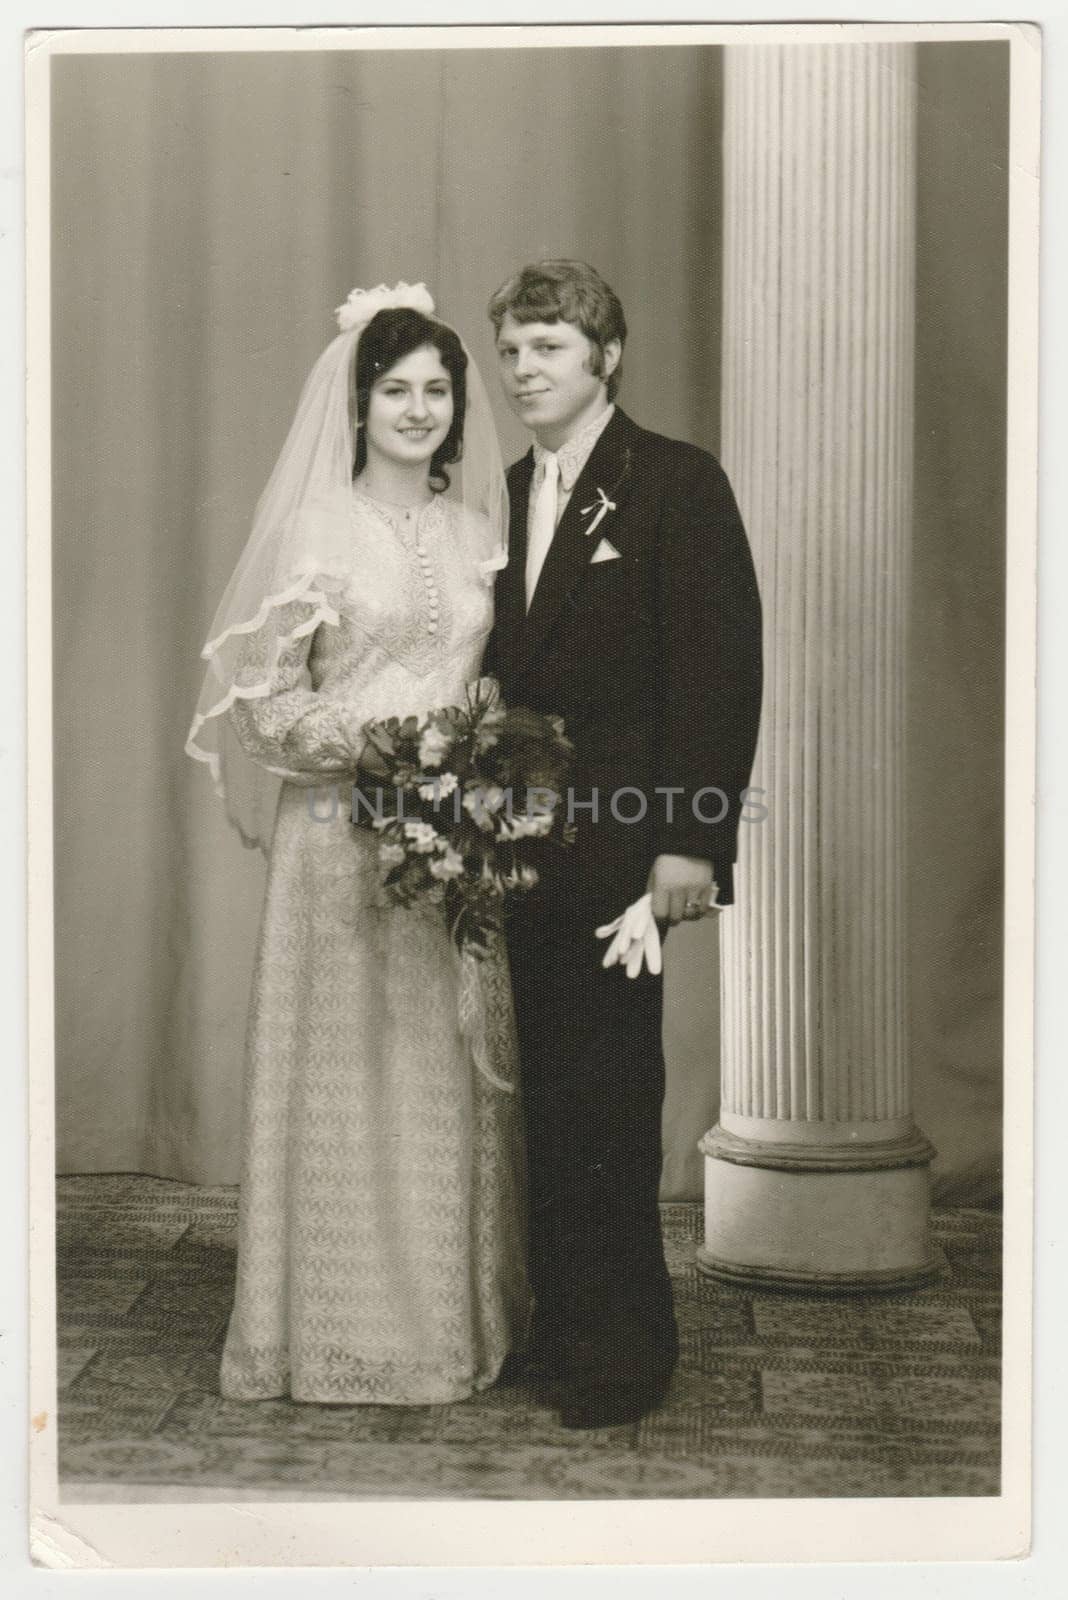 THE CZECHOSLOVAK SOCIALIST REPUBLIC - CIRCA 1980s: Vintage photo shows a bride with bridegroom. Bride wears a soft veil and holds wedding flowers - bouquet. Retro black and white photography. Circa 1980.